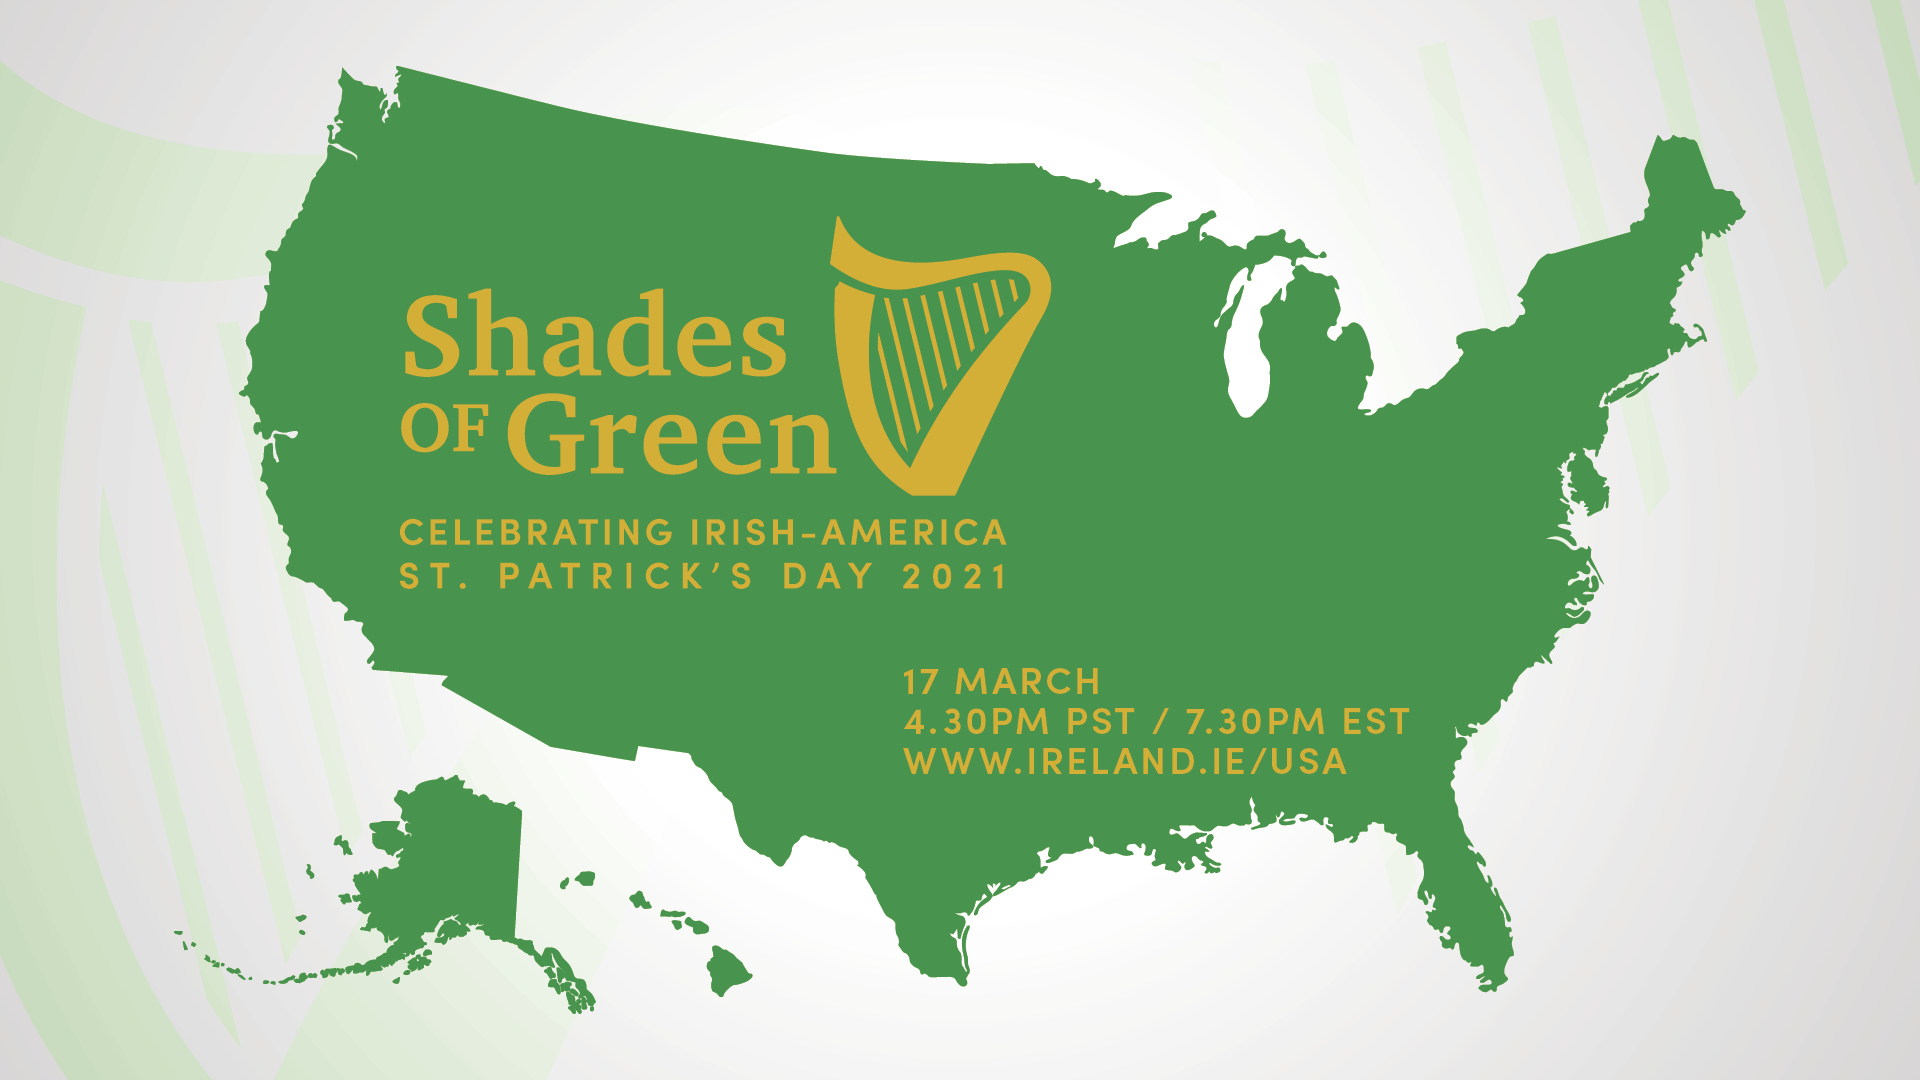 Announcing 'Shades of Green' – Celebrating Irish-America on St Patrick’s Day